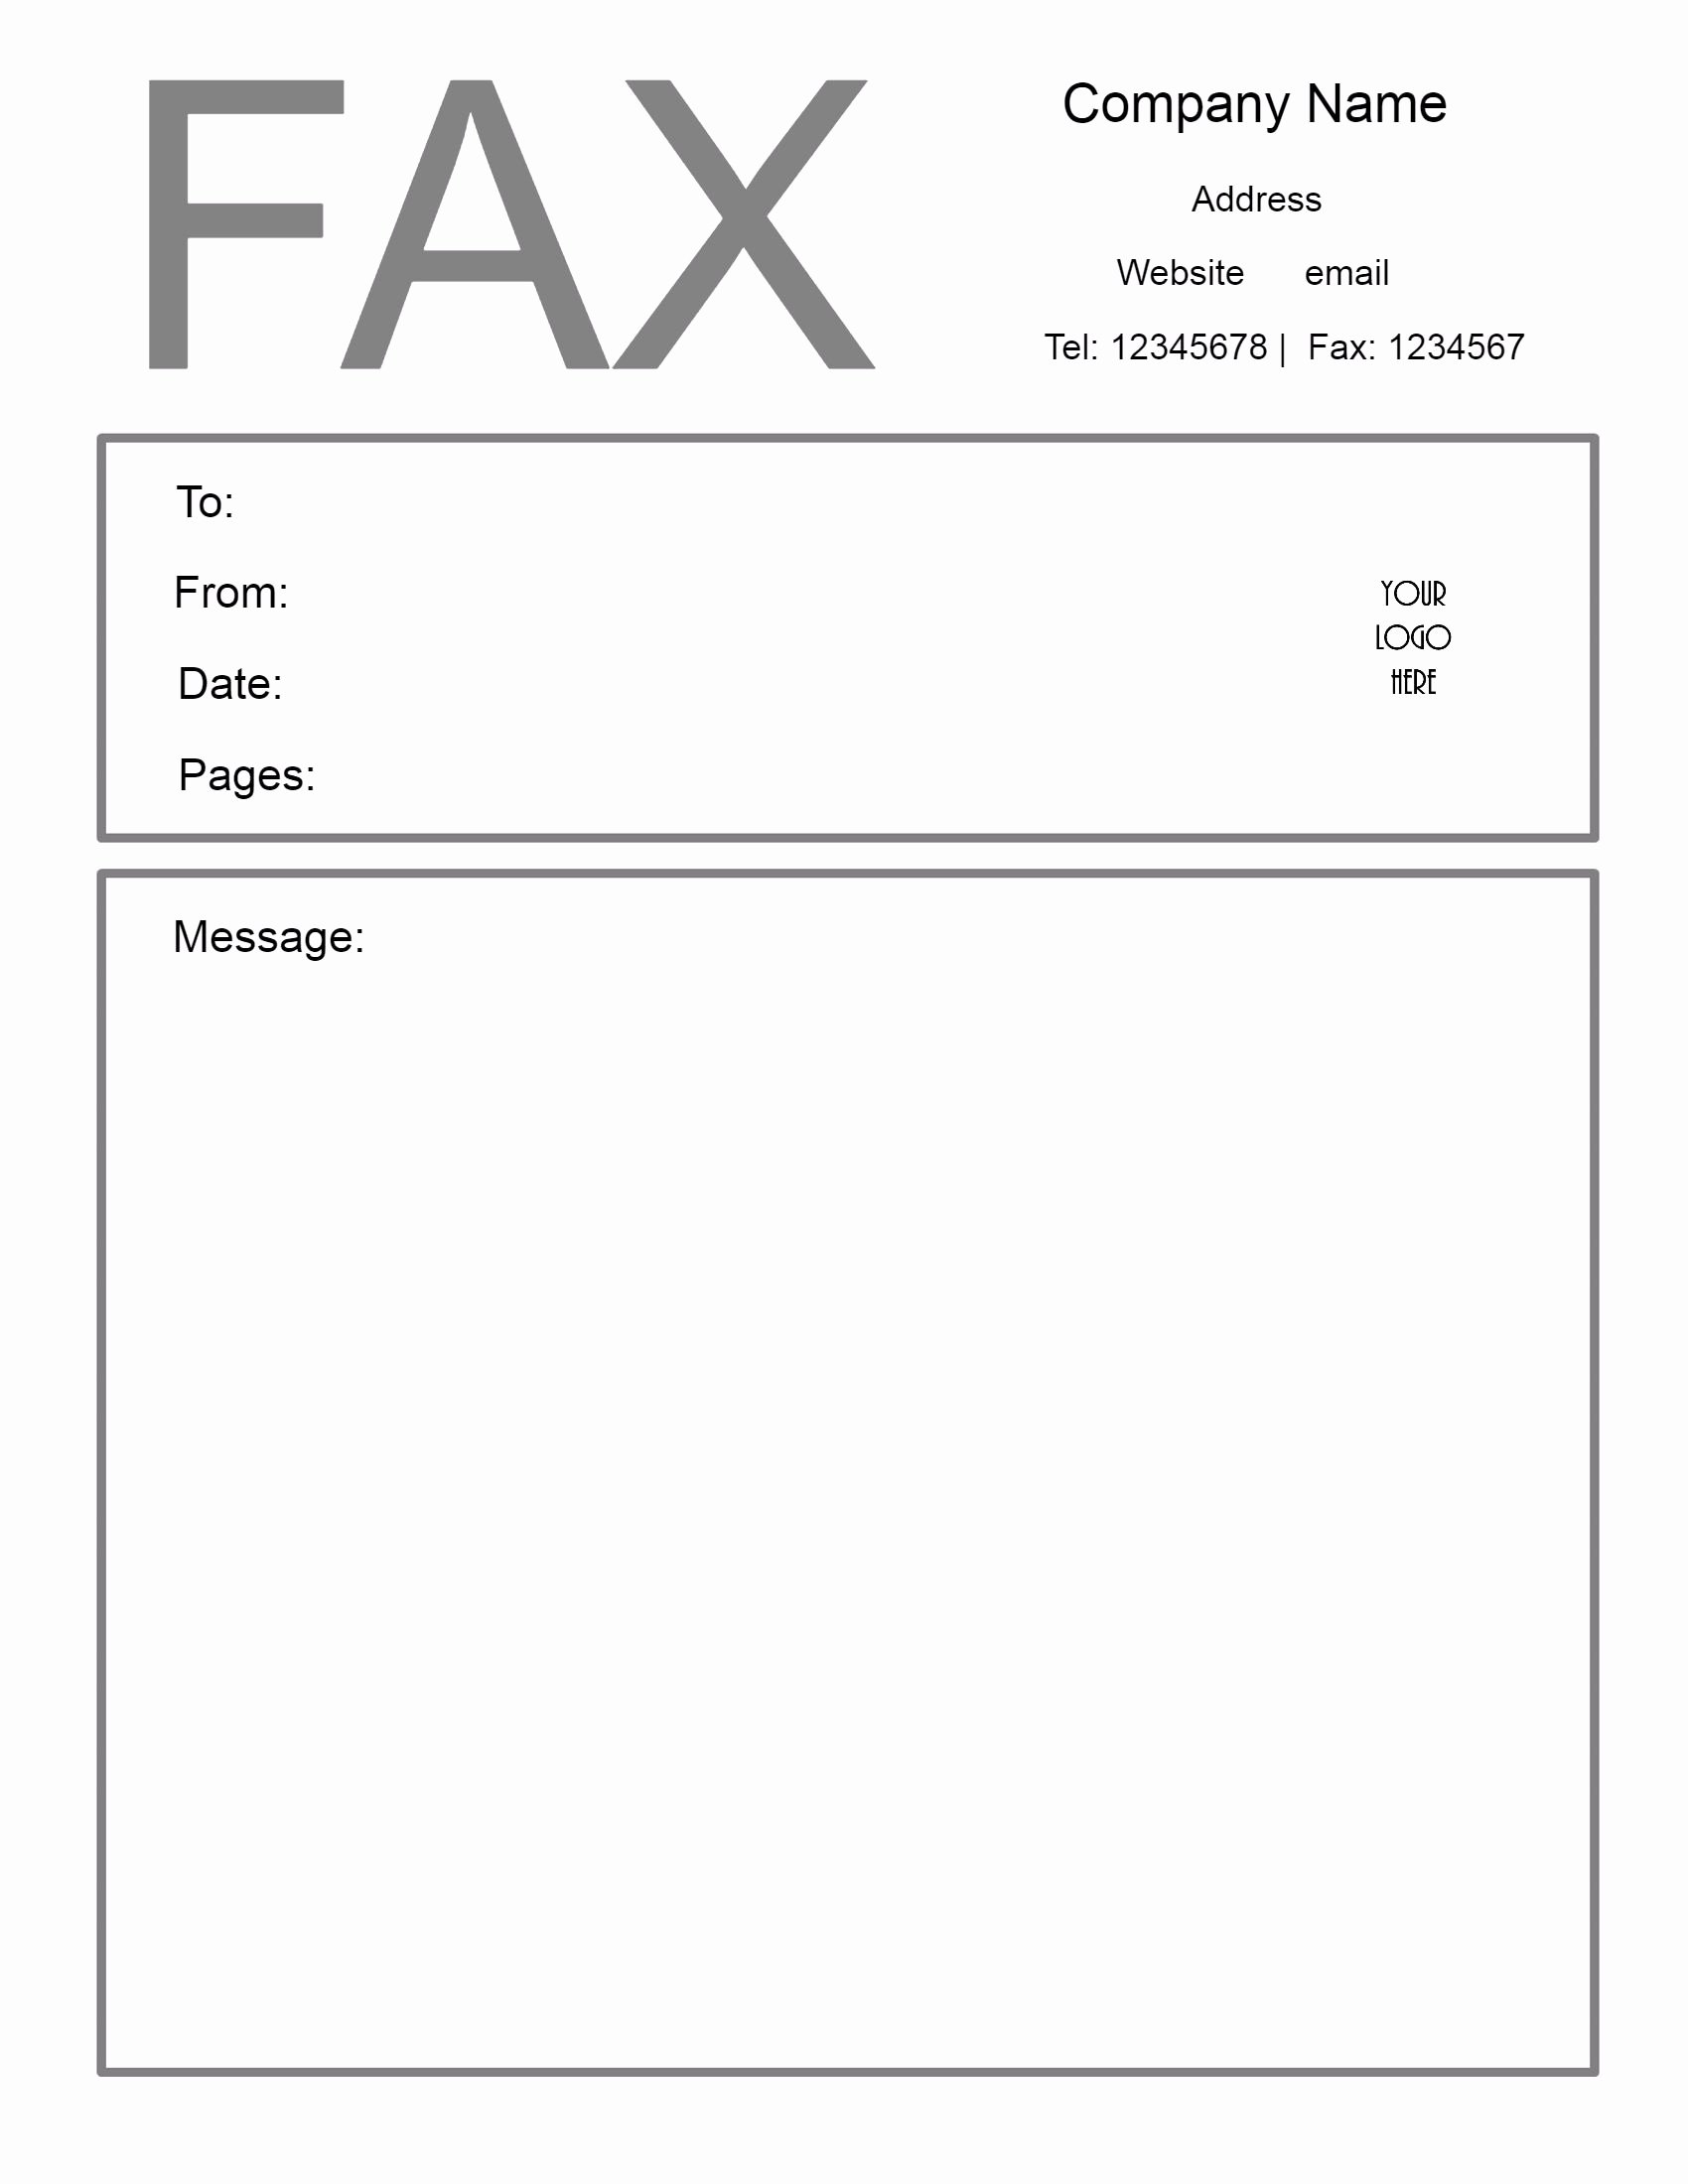 Fax Cover Sheet format Awesome Free Fax Cover Letter Template